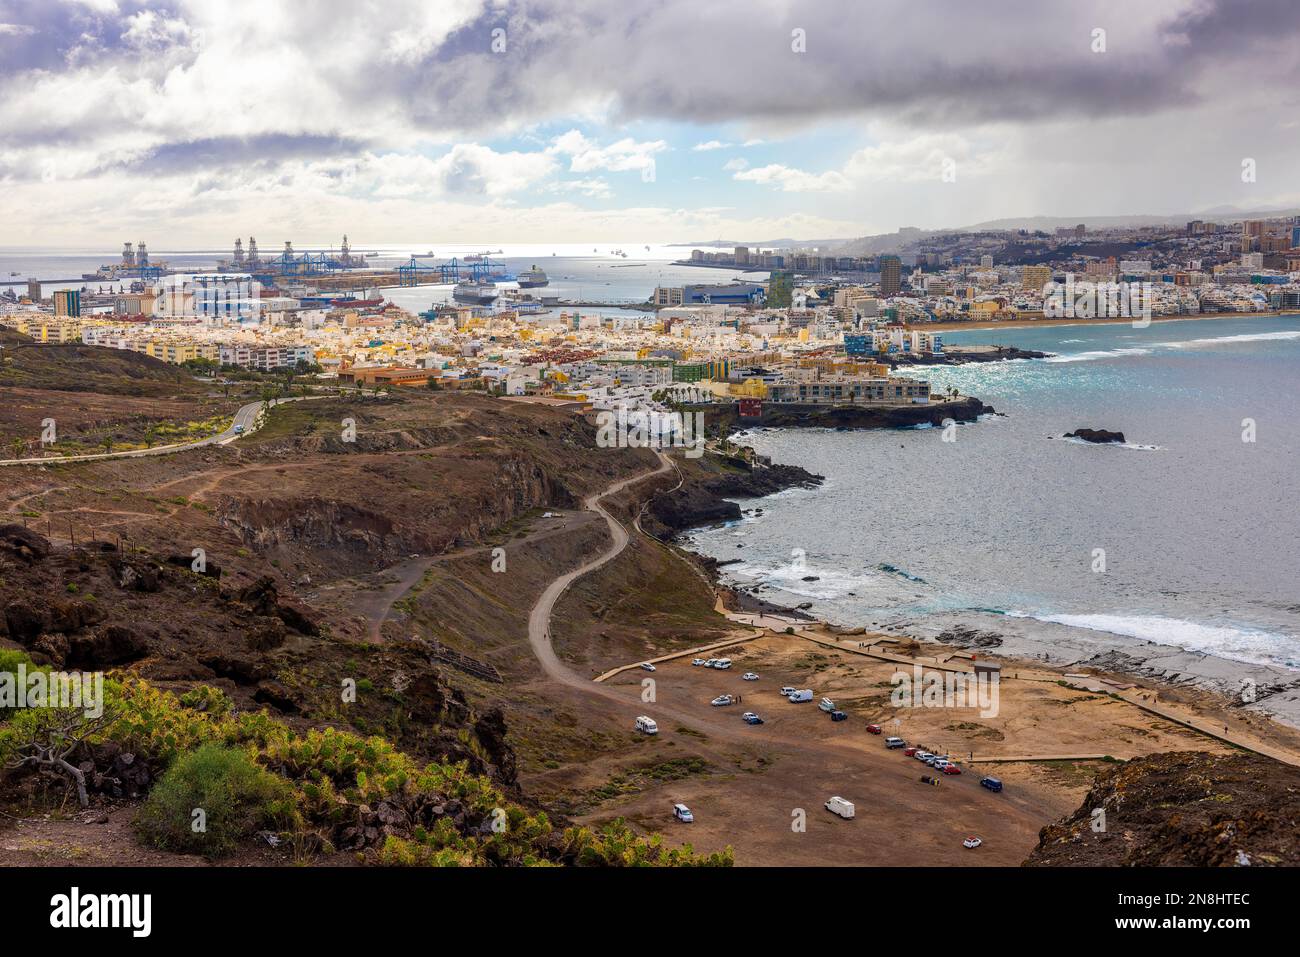 Las Palomas panorama with ships in the harbour from nearby hill on cloudy day. Ocean waves hitting the rocks on the beach. Stock Photo